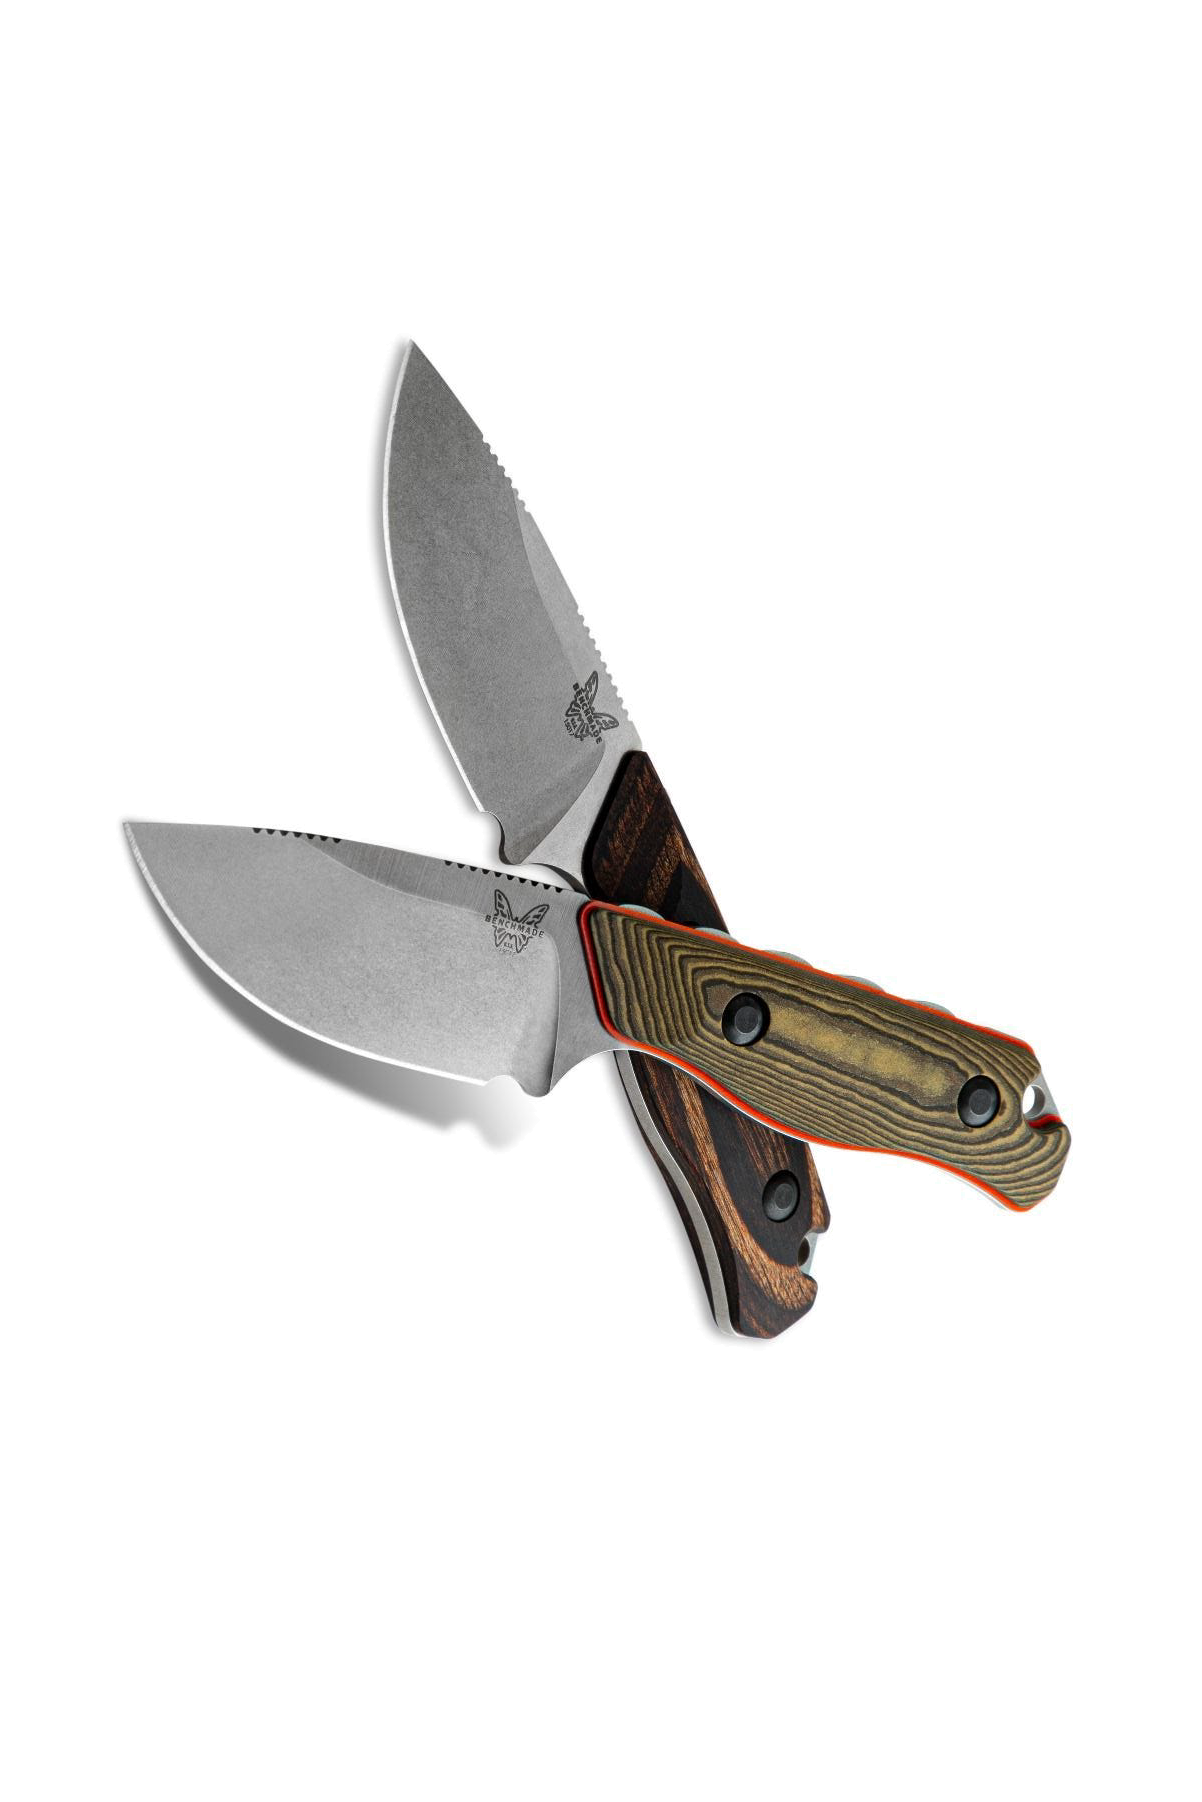 Benchmade Hidden Canyon Hunter Fixed Blade Knife product image